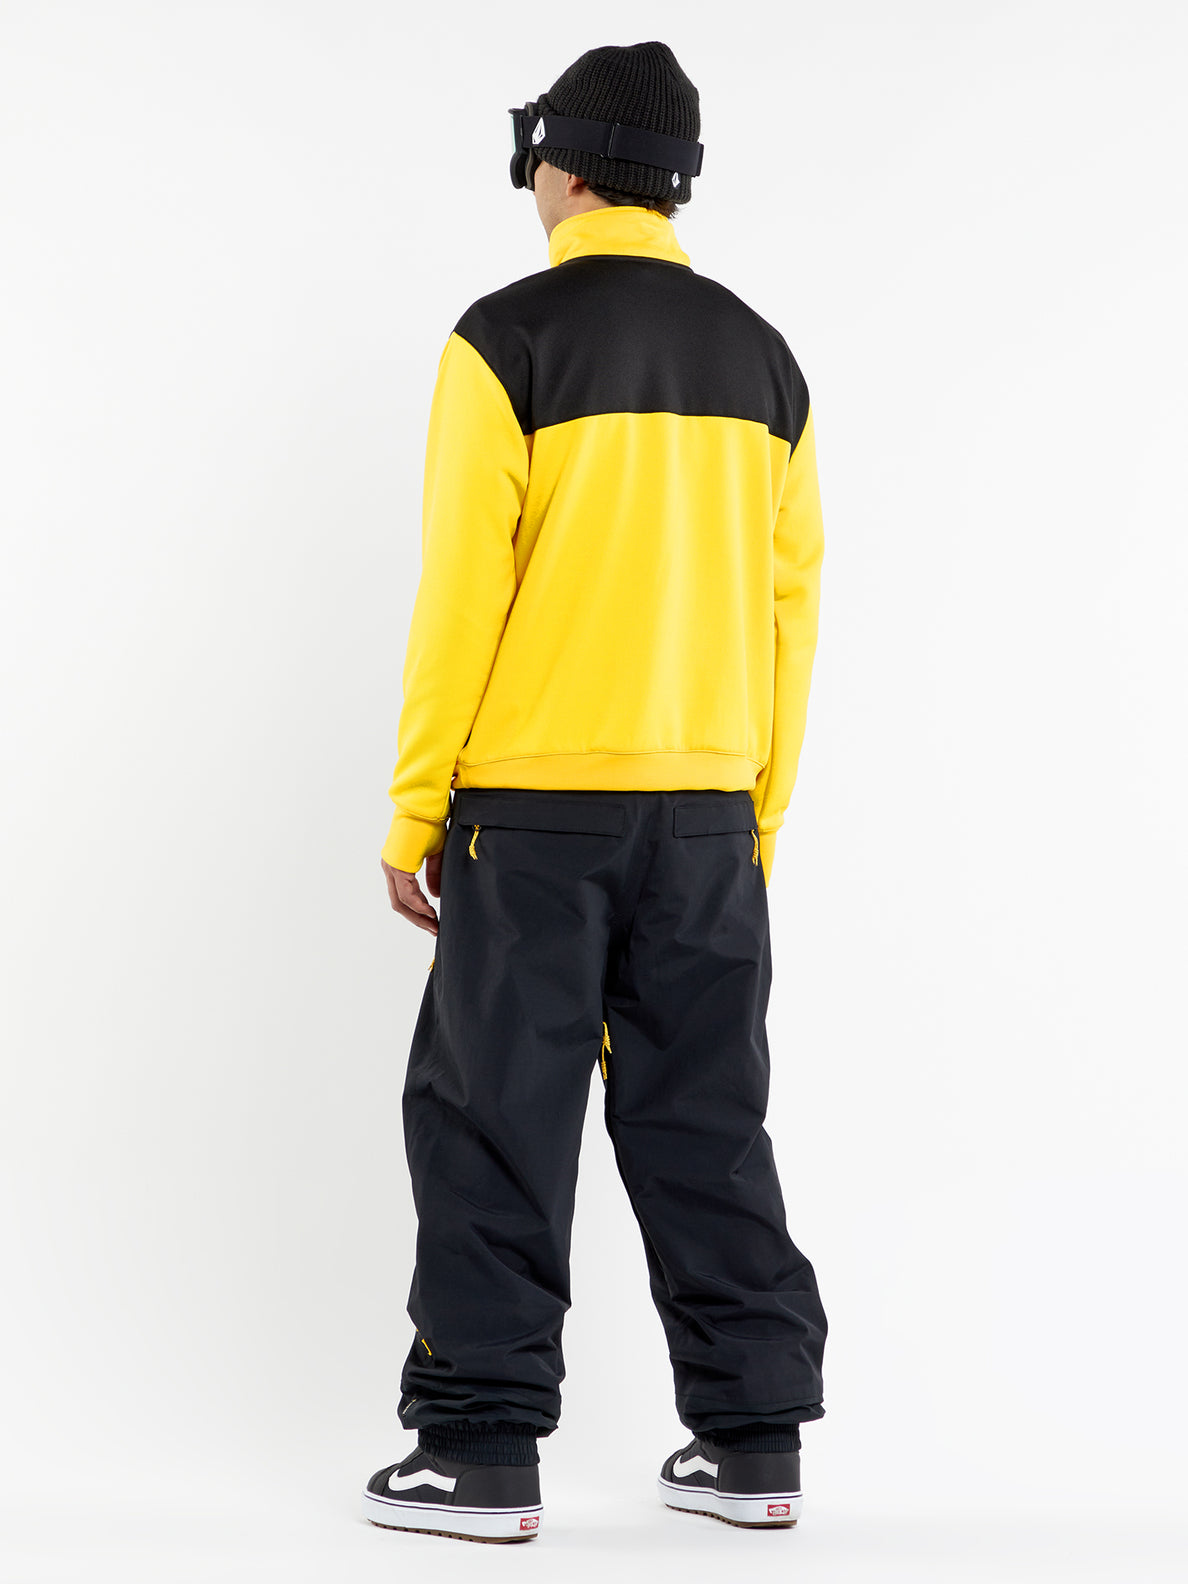 Mens She 2 Pullover Fleece - Bright Yellow (G4152406_BTY) [46]